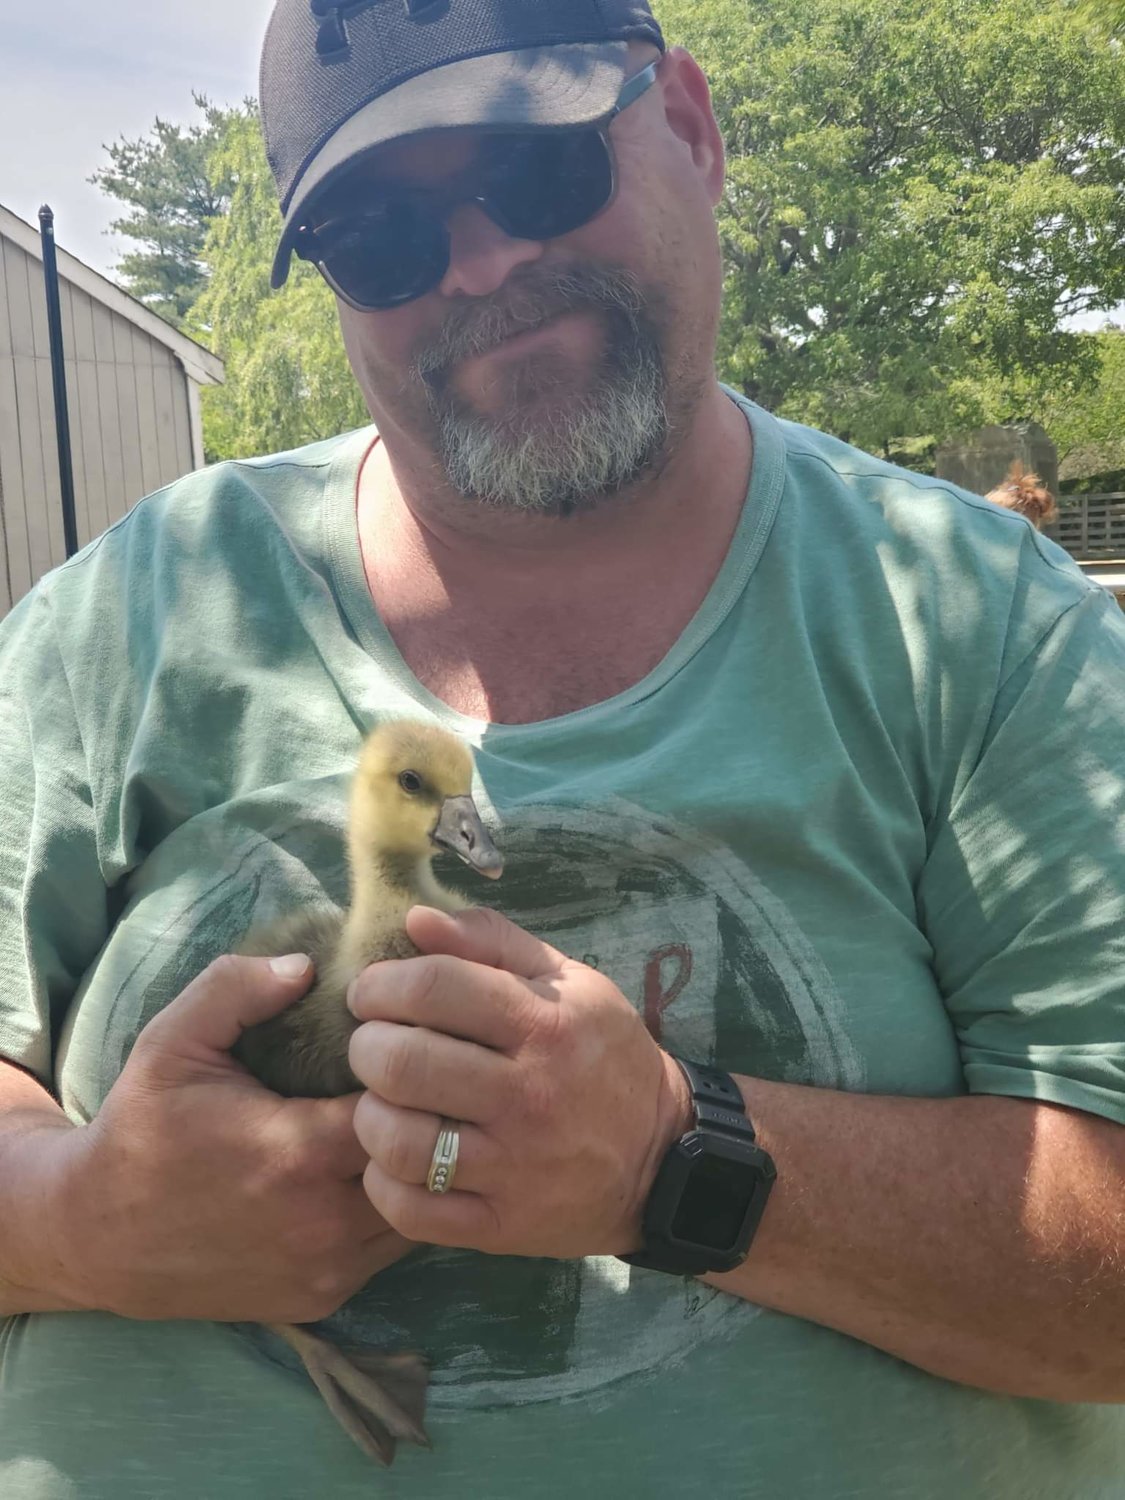 Greg Scharff (with duck that chooses to remain anonymous)
Oakdale
“Always love animals and watch for others that do, too.”